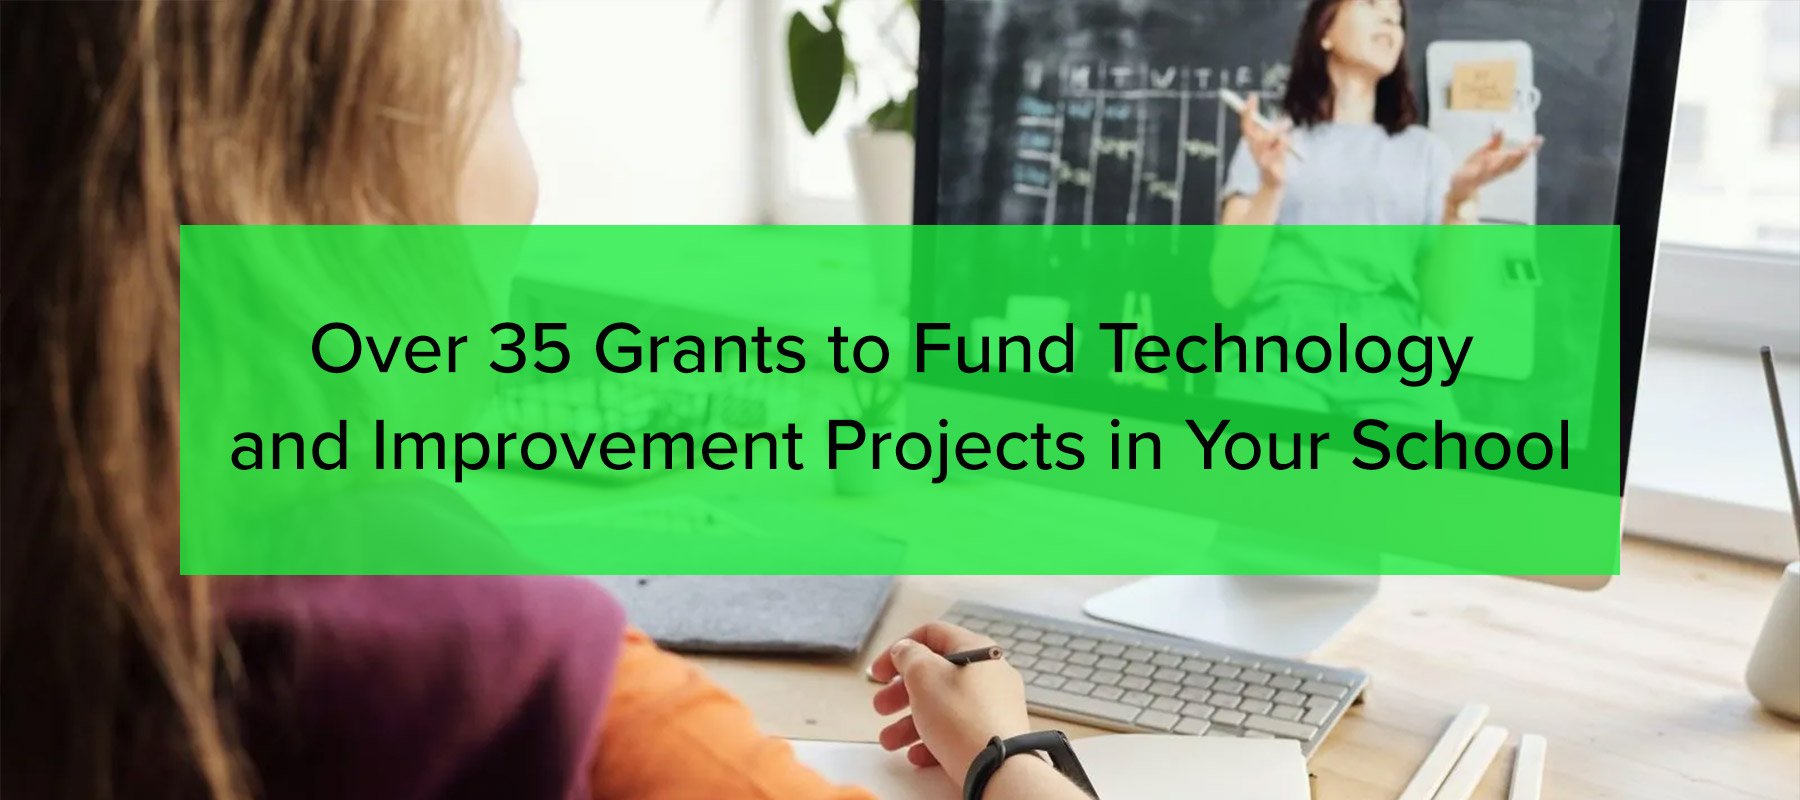 Over 35 Grants to Fund Technology and Improvement Projects in Your School pic